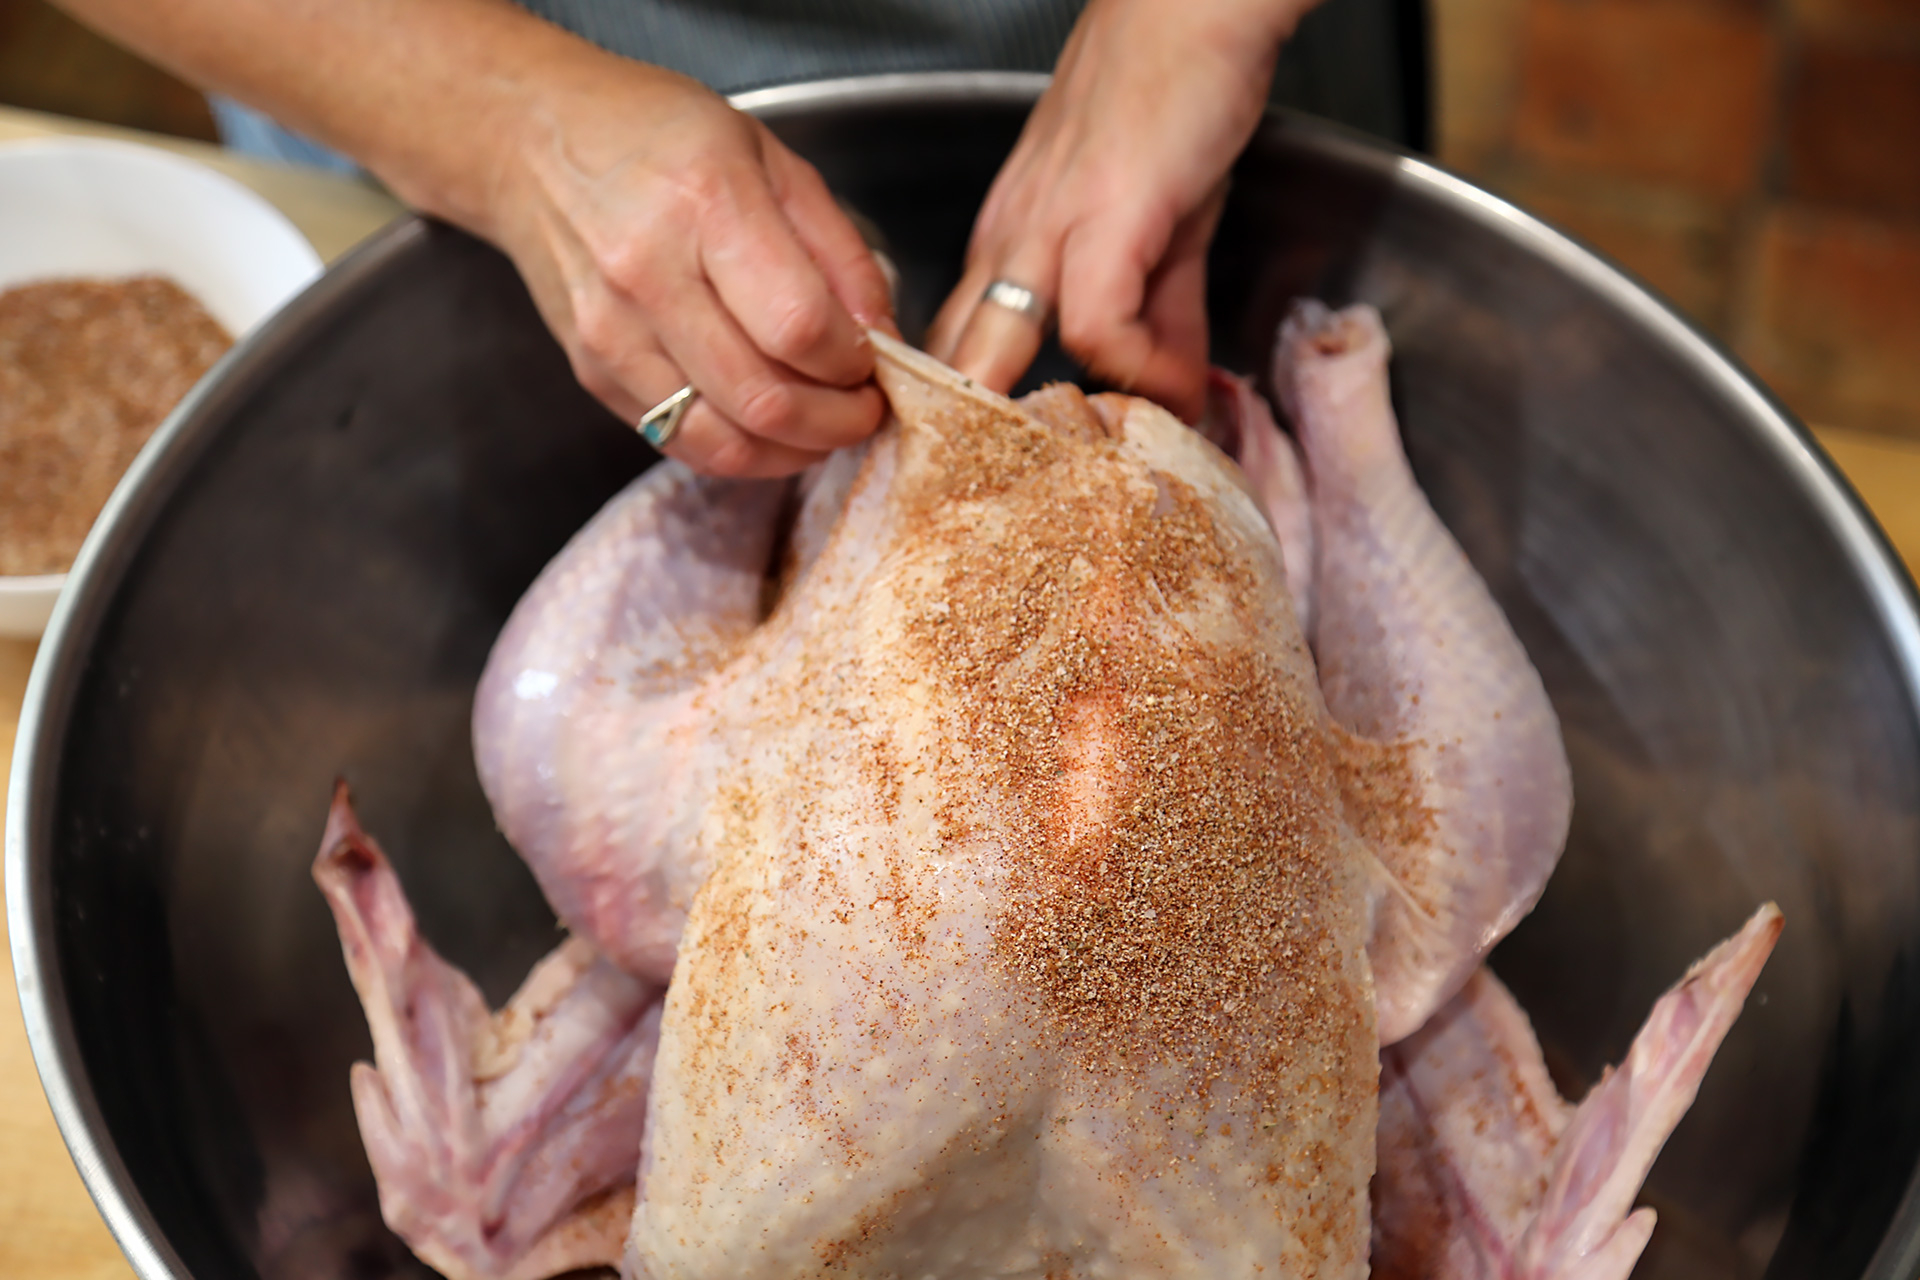 Rub the turkey all over the outside and under the skin (as much as possible without tearing) with the spice rub.